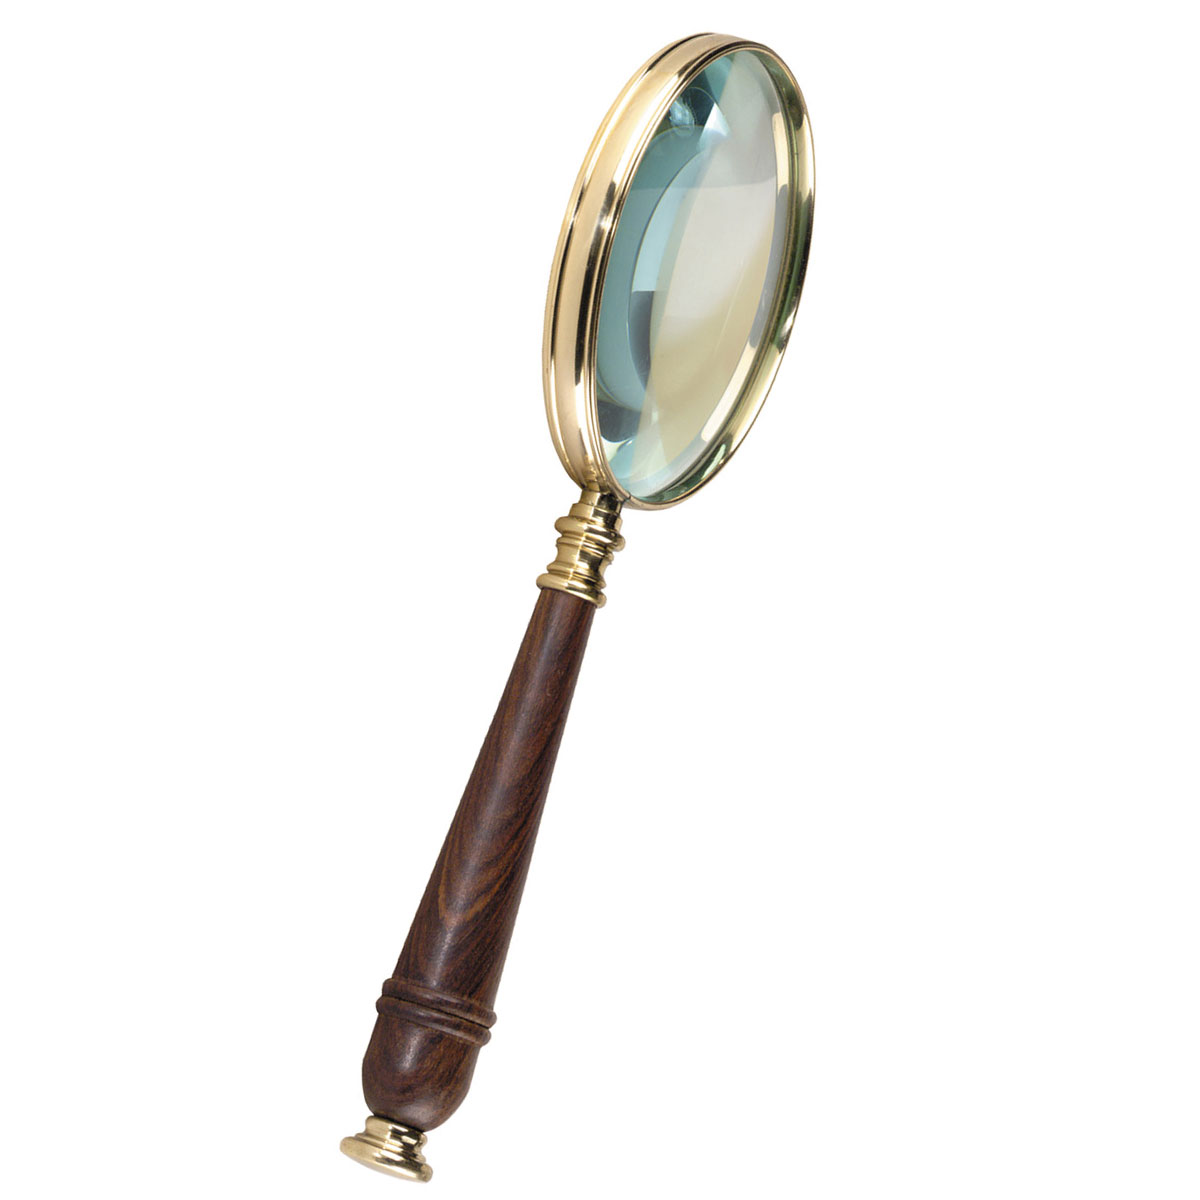 Antique vintage brass 7.5" wooden handle magnifying glass magnifier best gift 